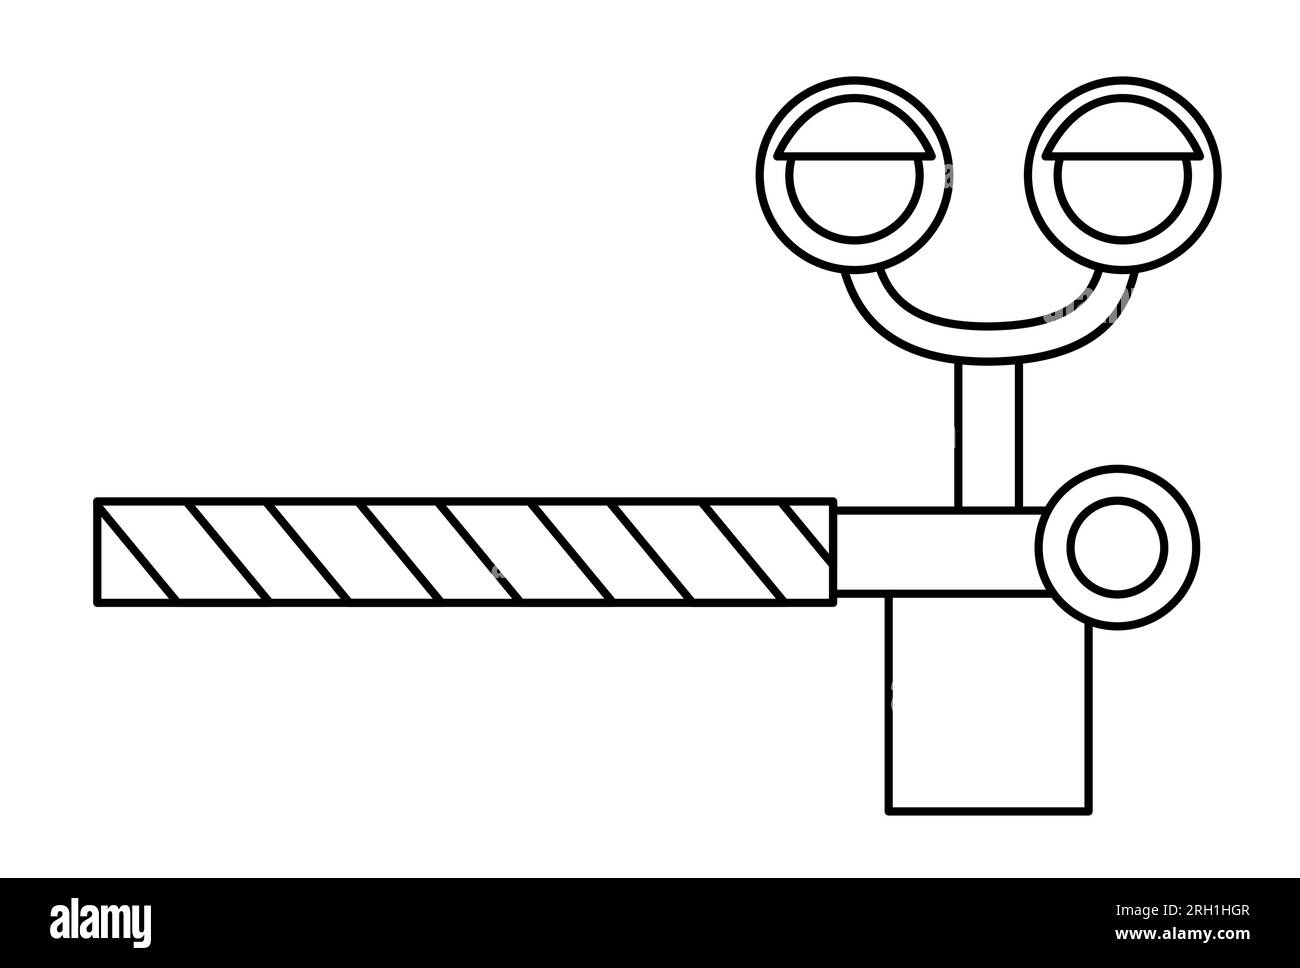 Vector black and white railroad barrier with traffic lights. Railway gate with semaphore line icon. Rail way stop sign or coloring page isolated on wh Stock Vector